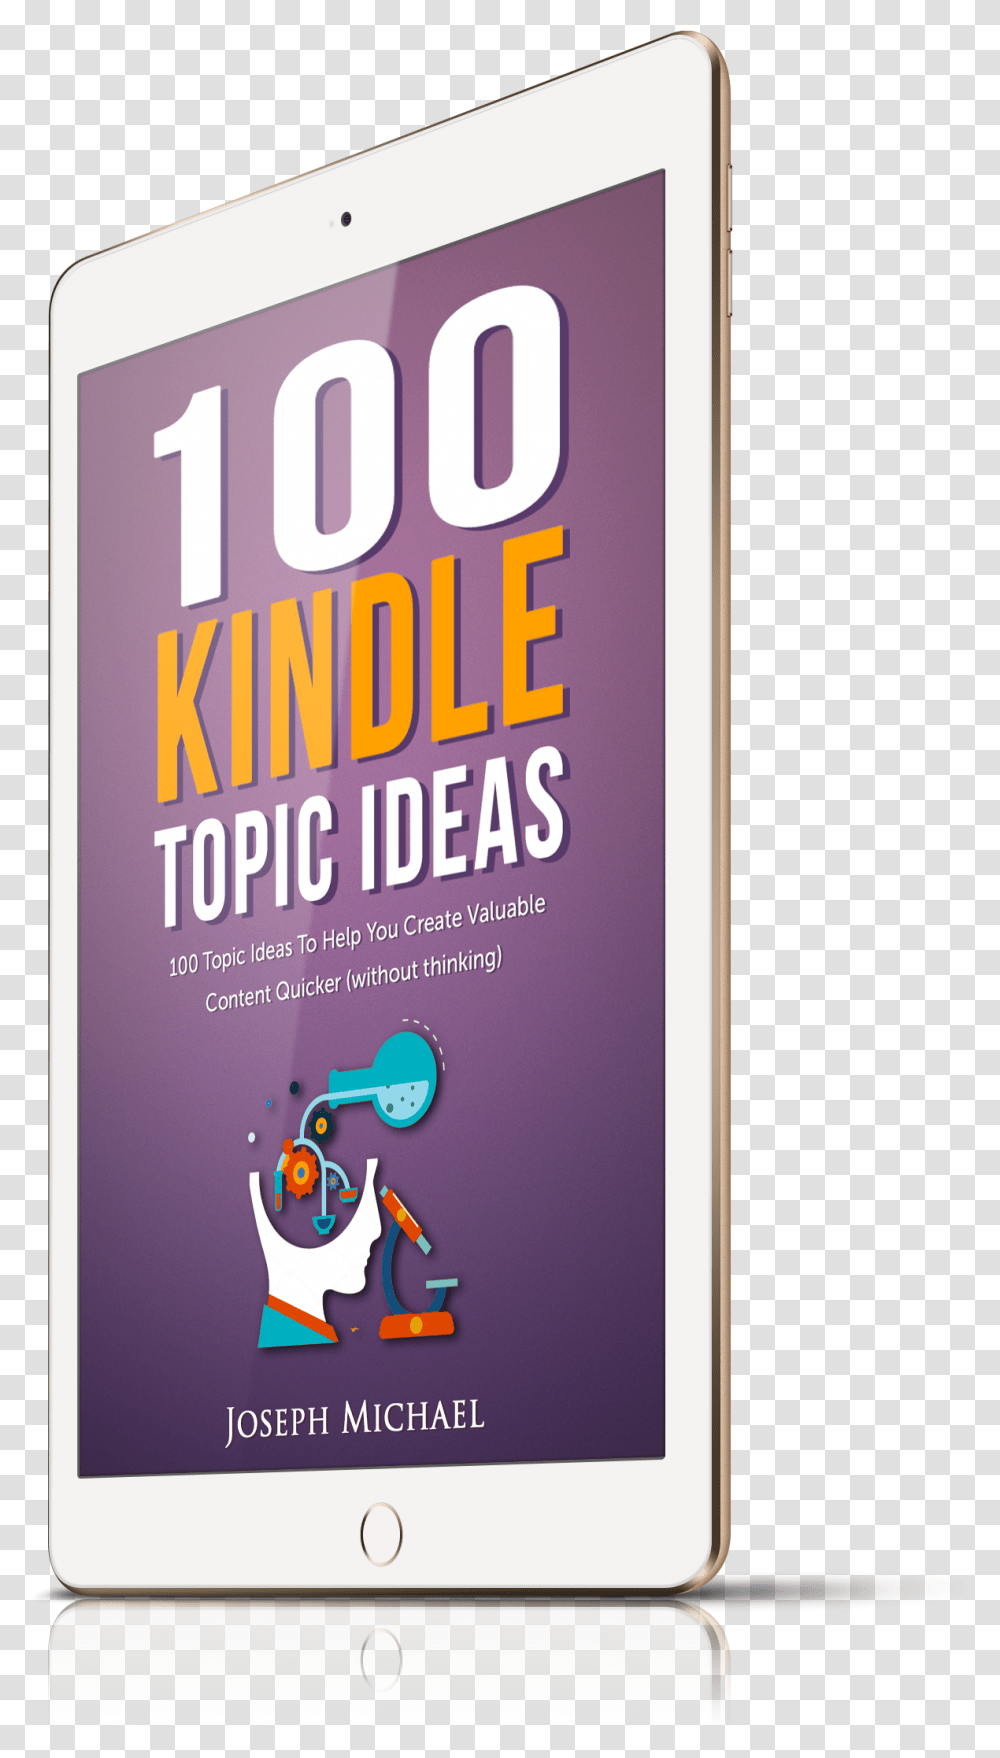 Kindle Topic Ideas Ipad Tilted Right Cartoon, Mobile Phone, Electronics, Poster, Advertisement Transparent Png